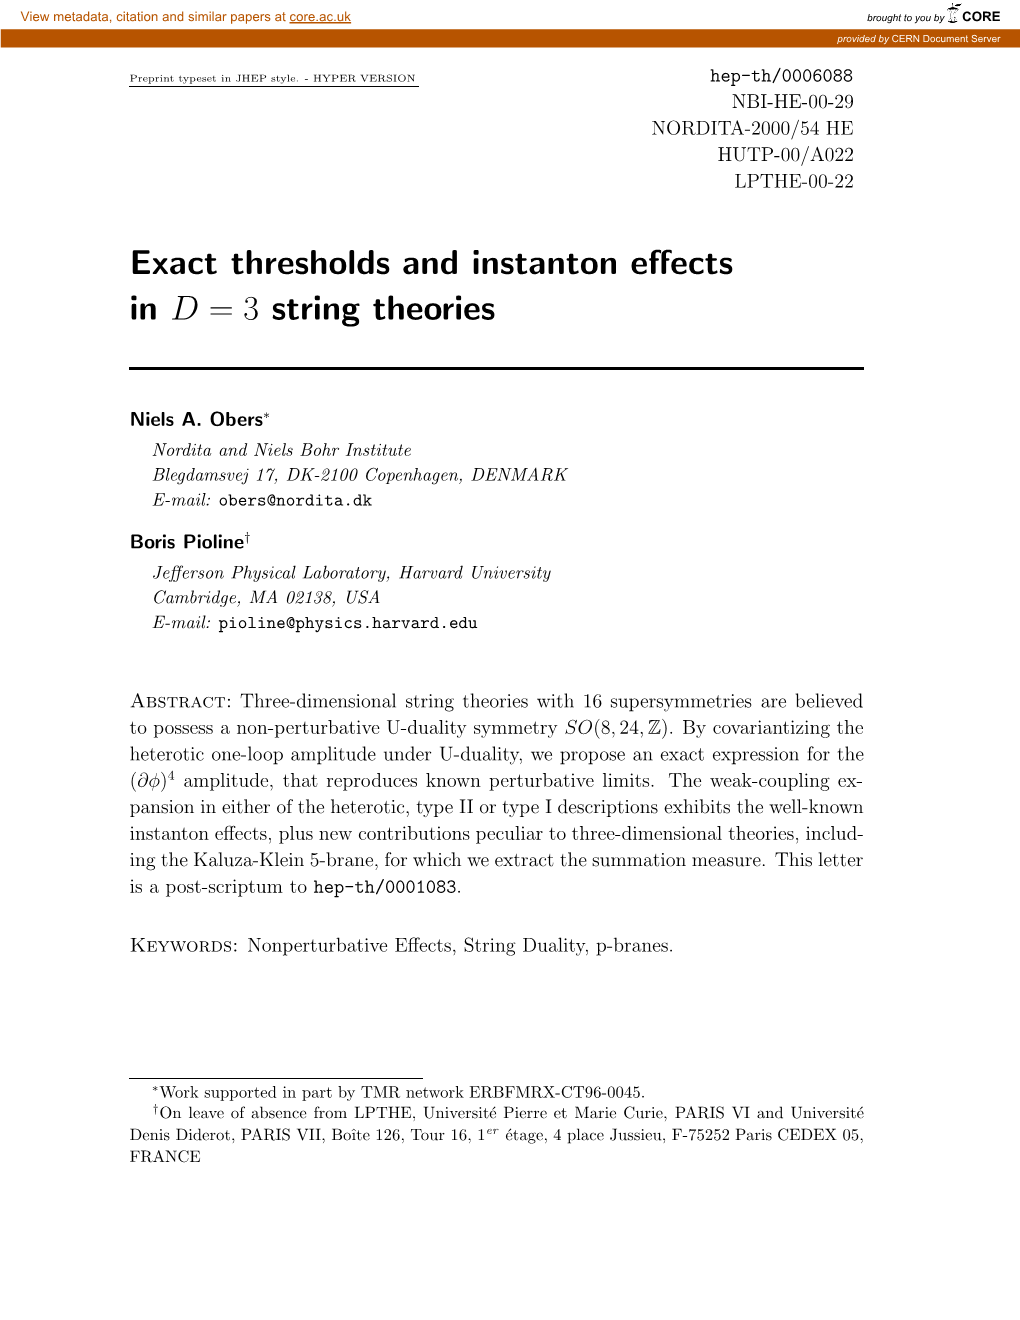 Exact Thresholds and Instanton Effects in D = 3 String Theories